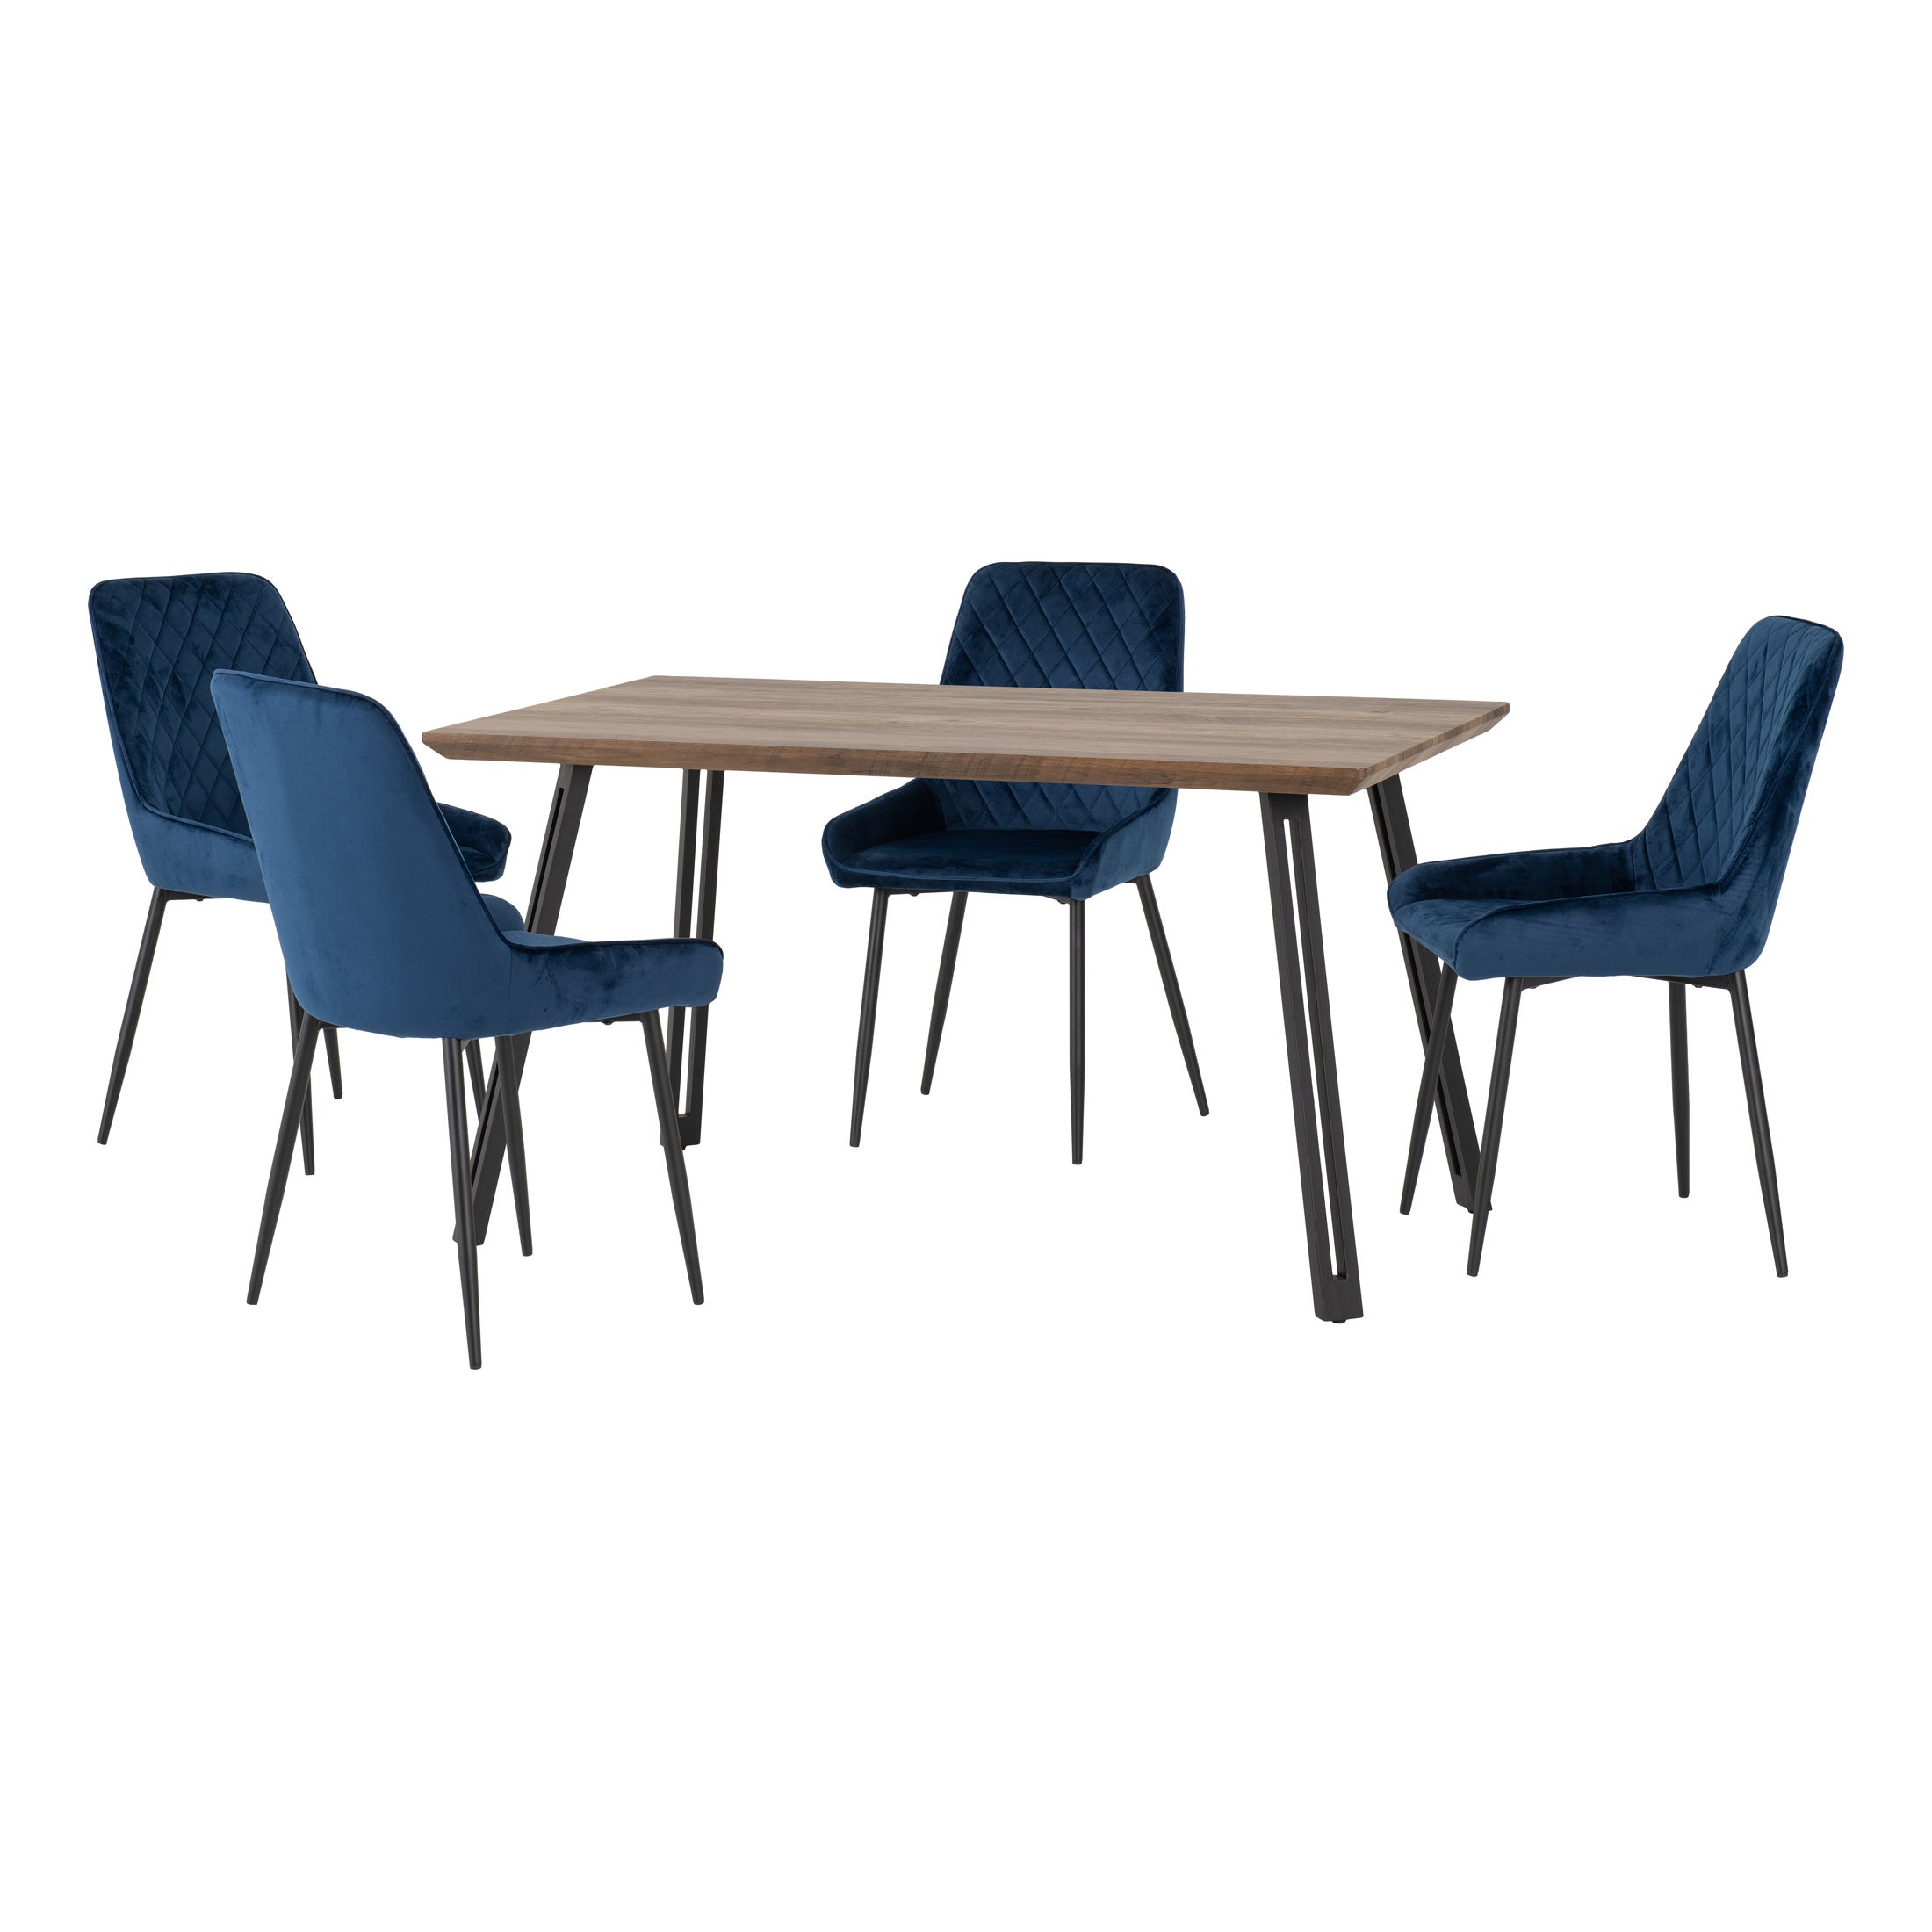 Quebec Rectangular Dining Table with 4 Avery Chairs